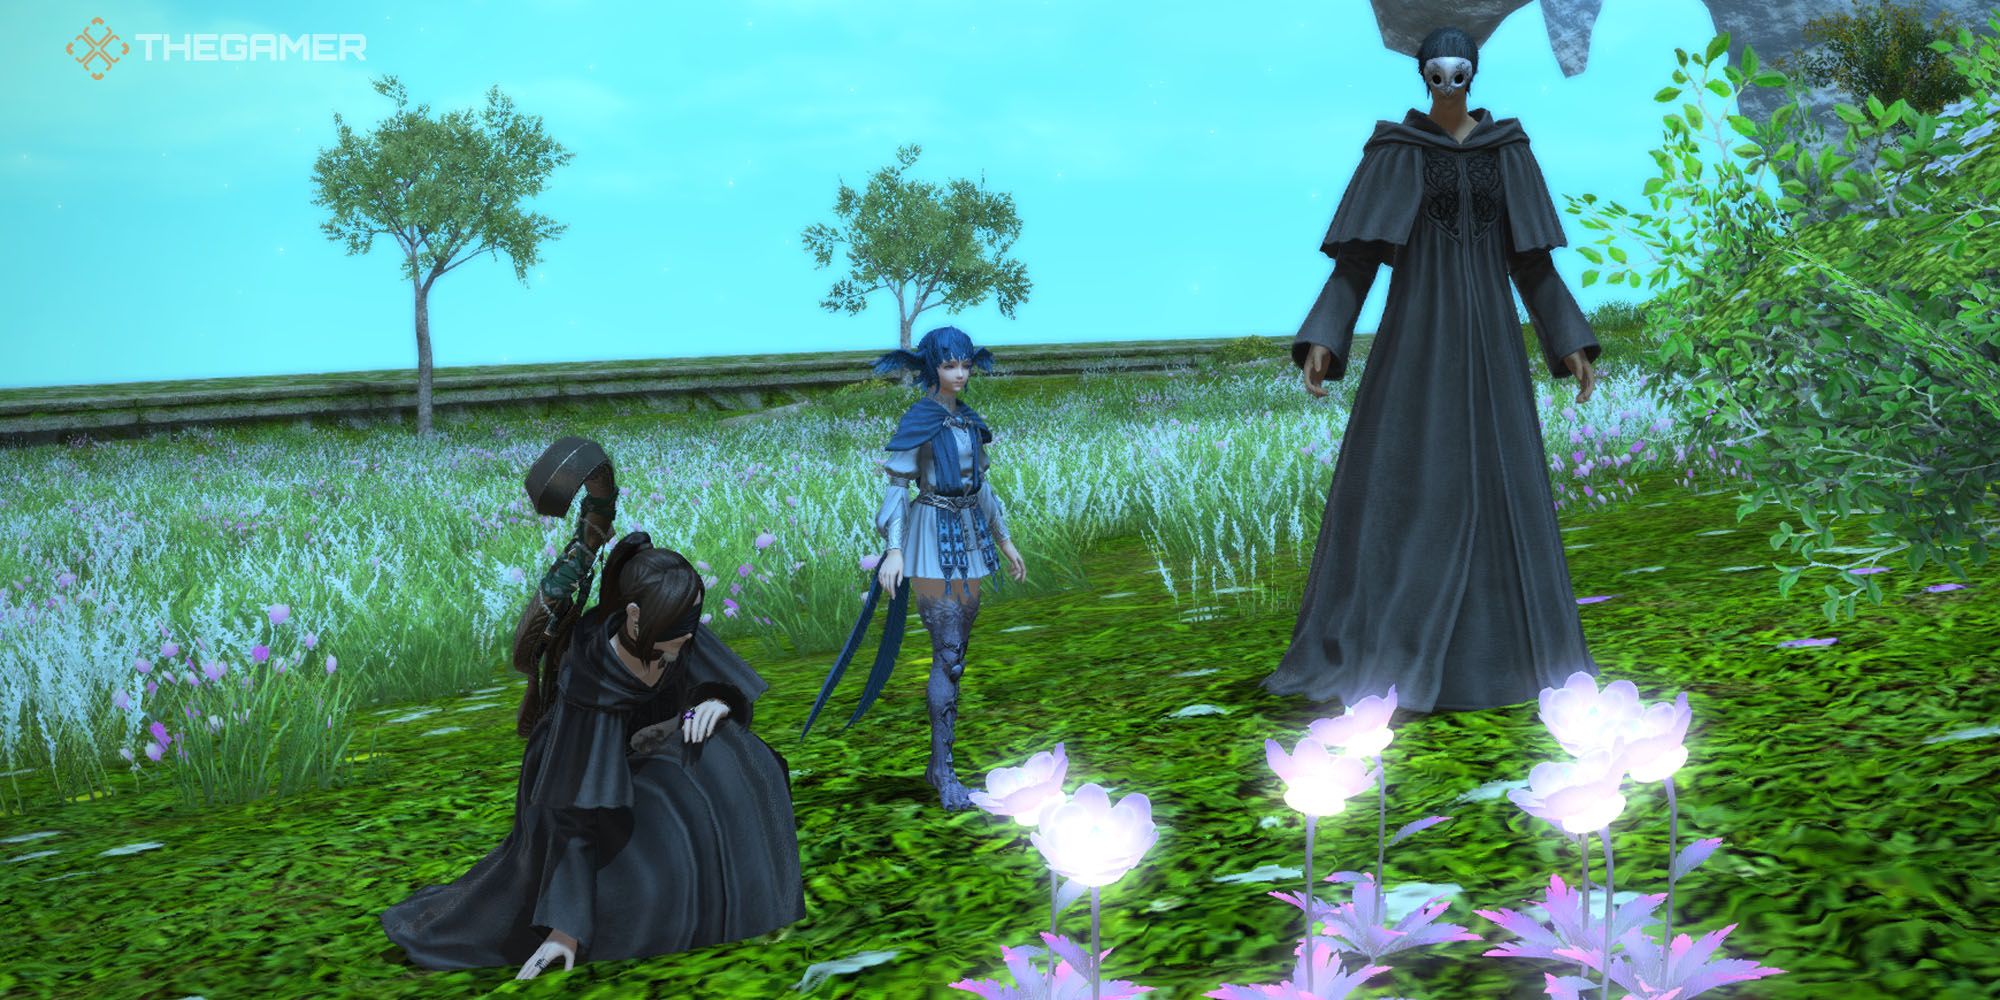 FF14-warrior-of-light-meteion-and-hermes-with-the-elpis-flowers-1